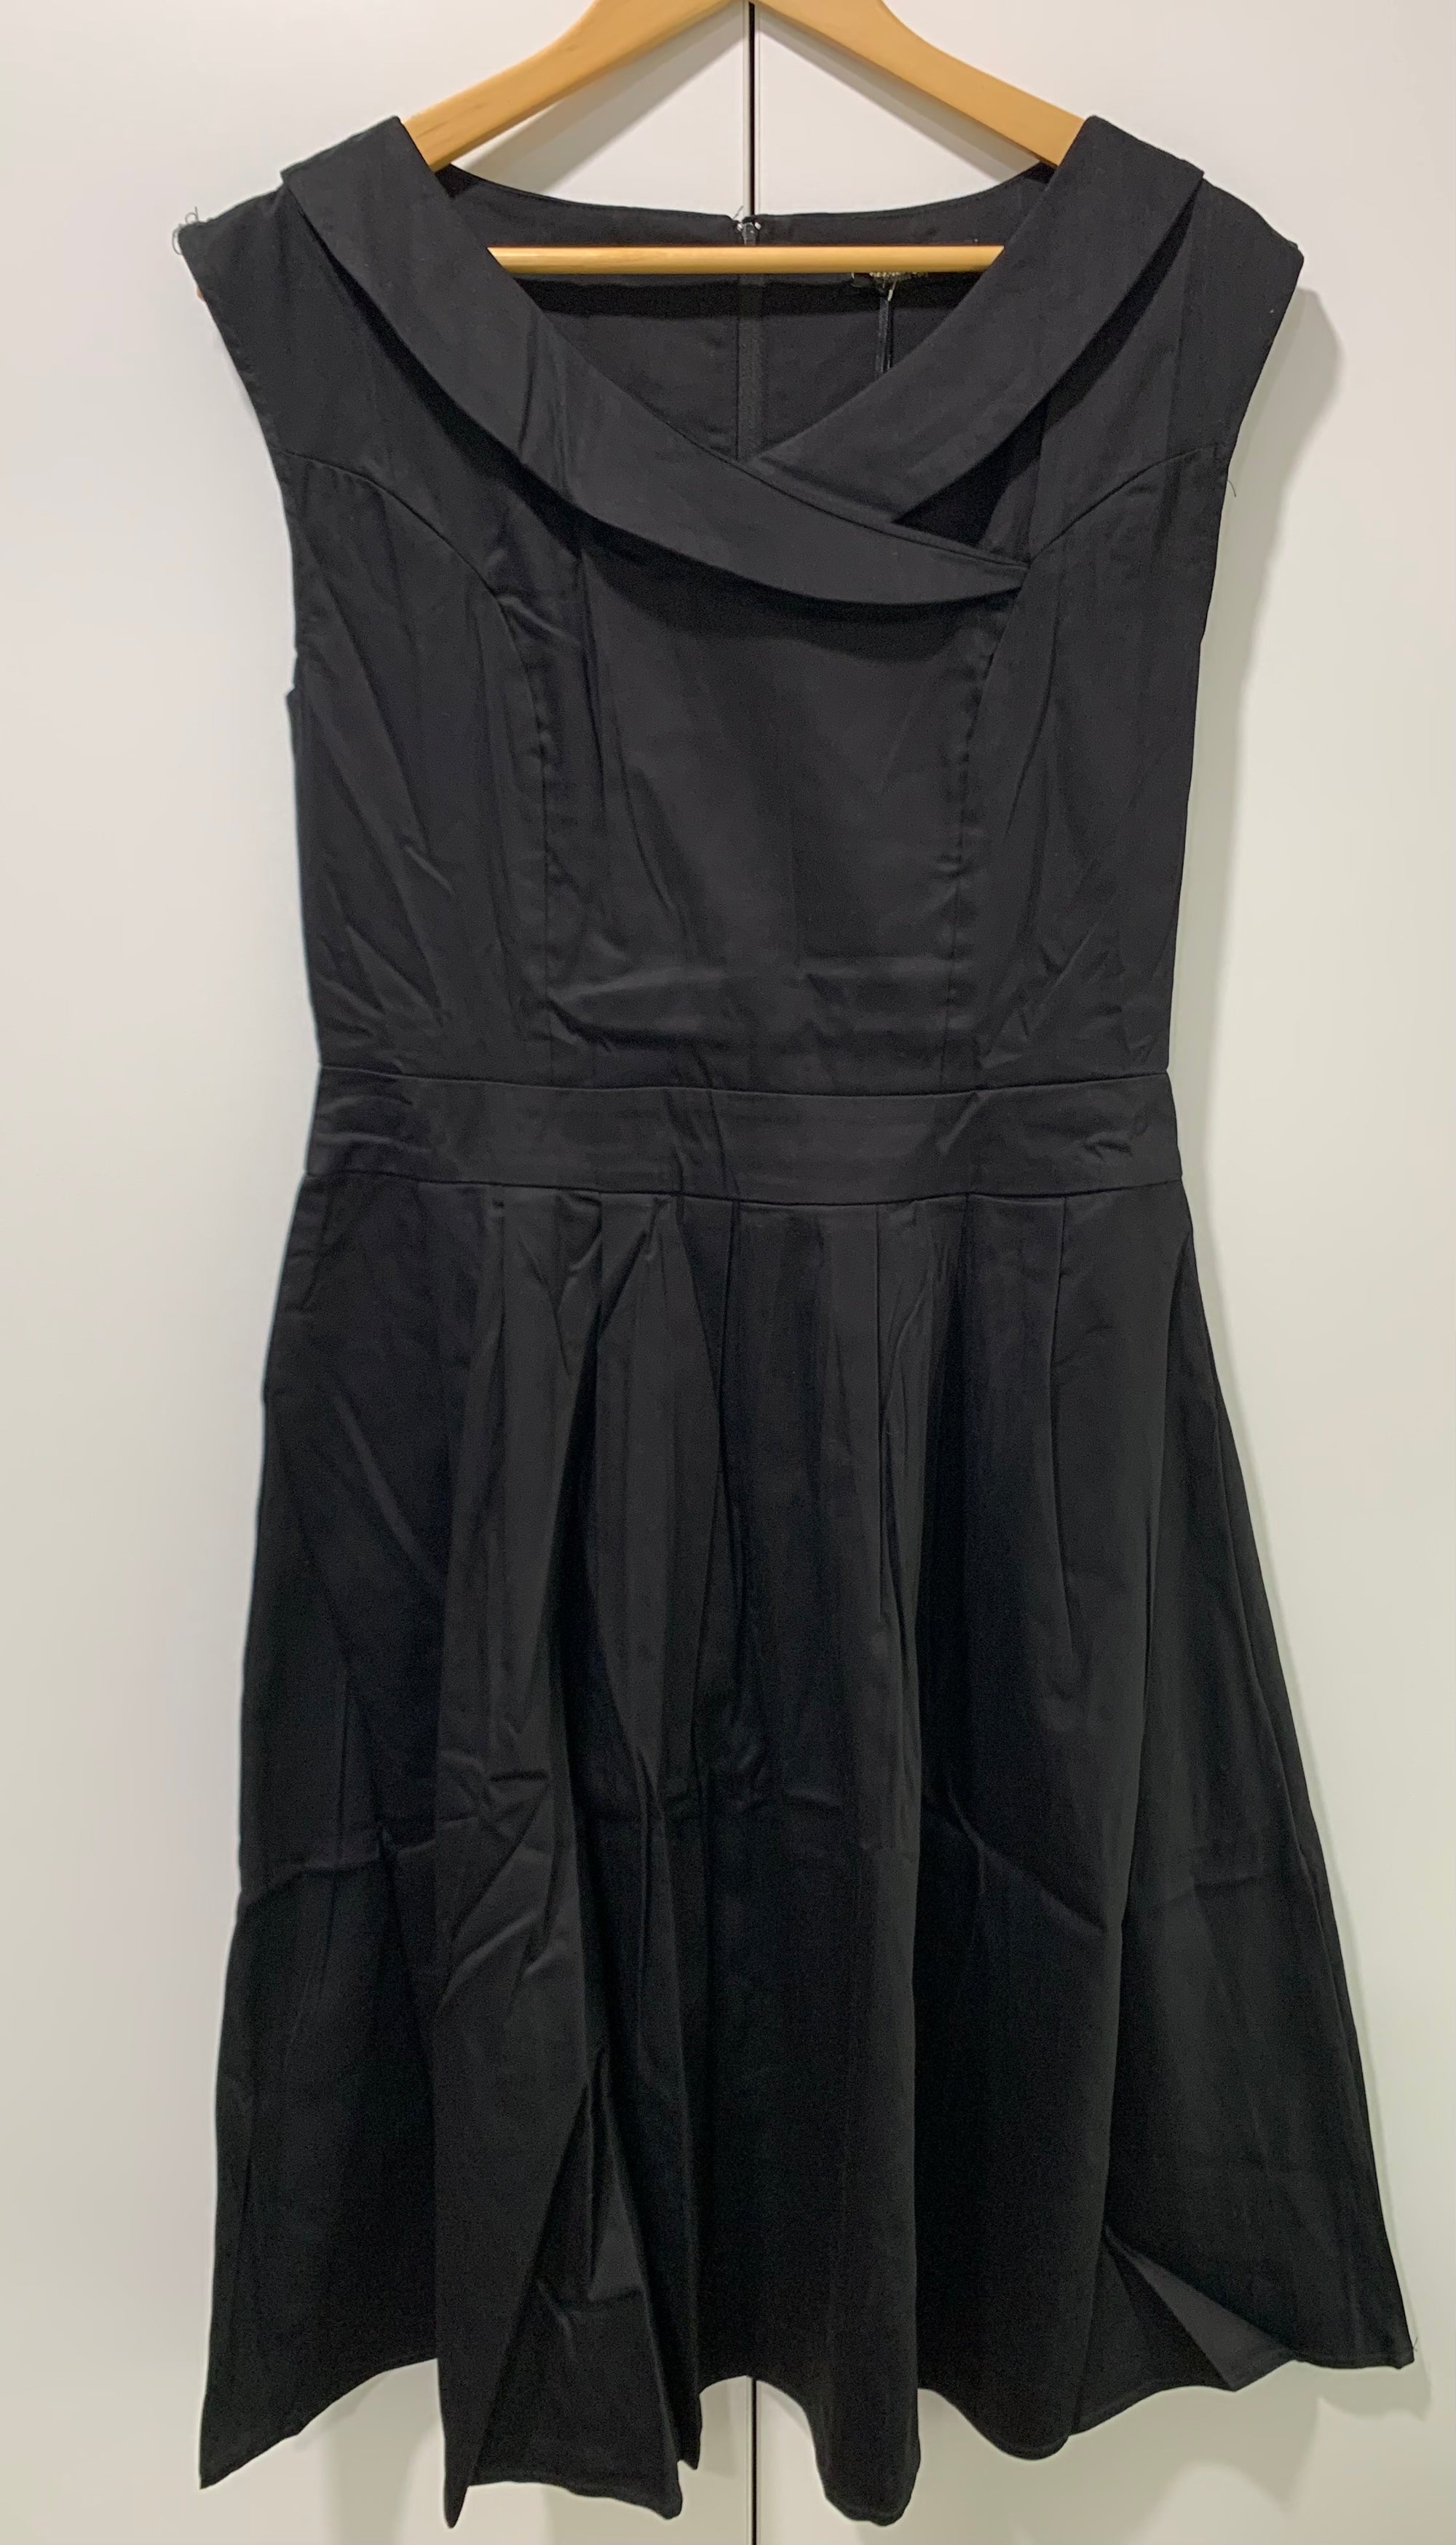 Timeless by Vanessa Tong Classic Black Vintage/Retro Dress Sizes 8-18